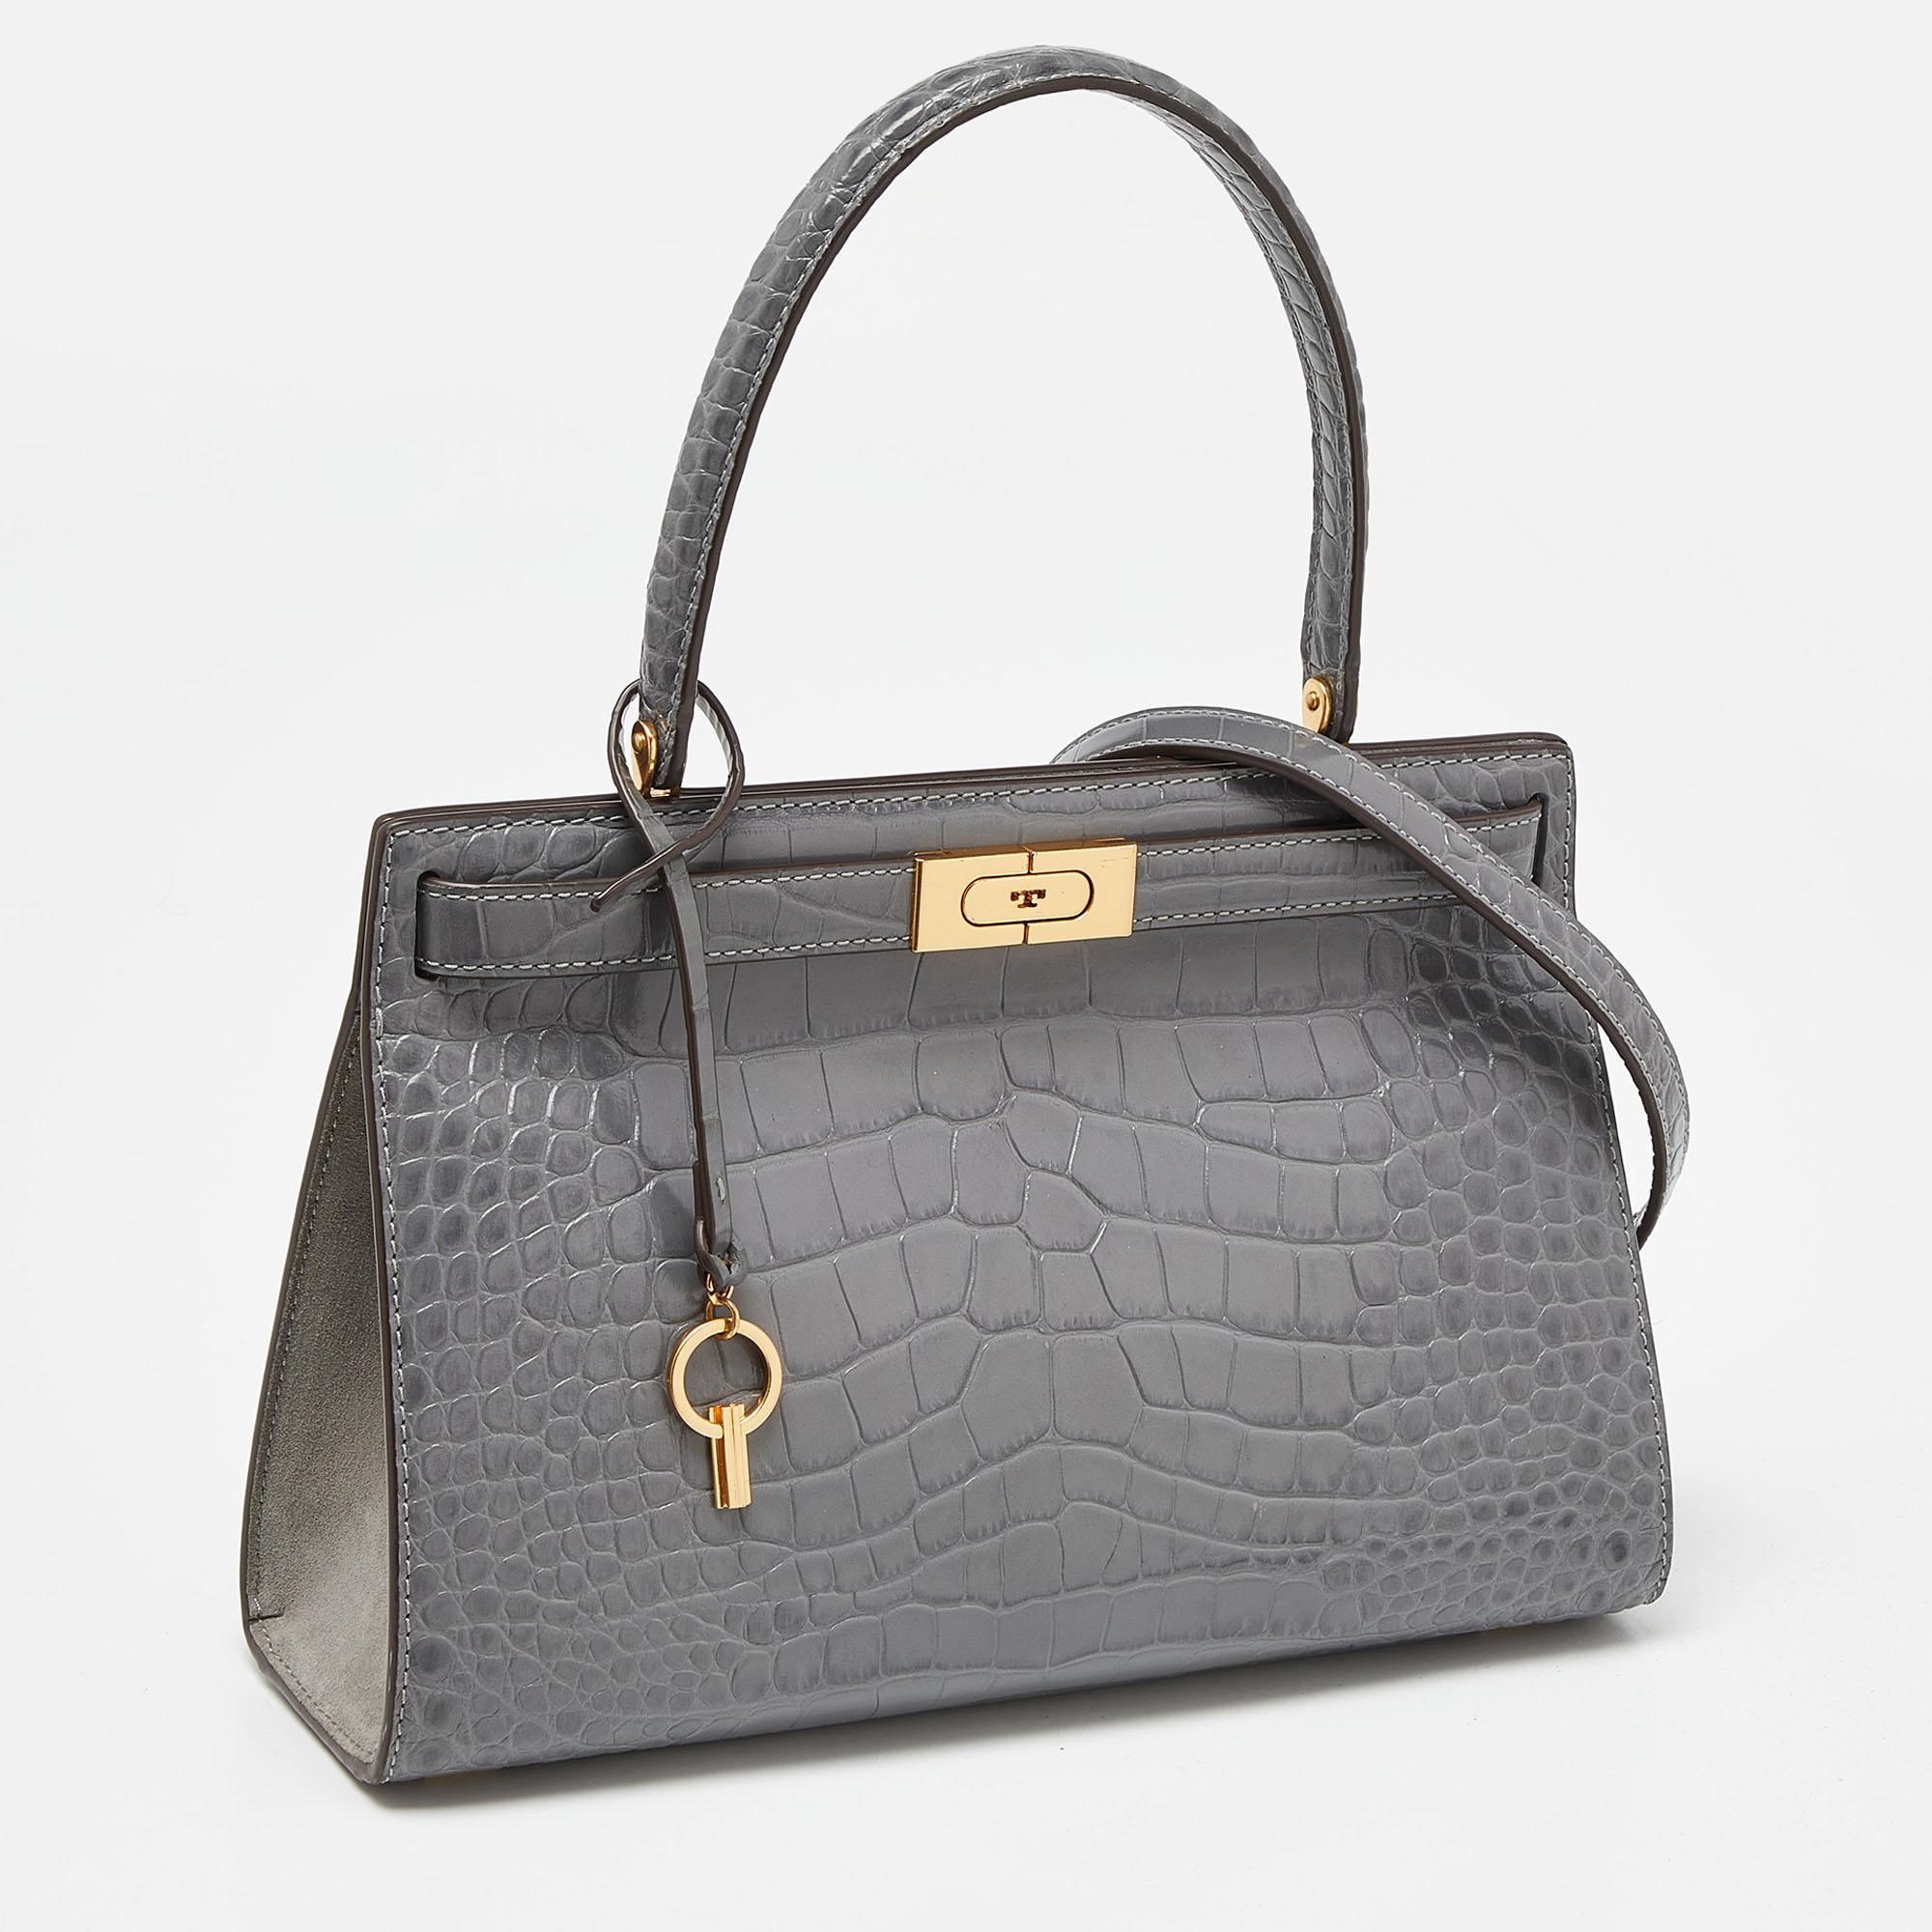 Tory Burch Grey Croc Embossed Leather Small Lee Radziwill Top Handle Bag In Good Condition For Sale In Dubai, Al Qouz 2